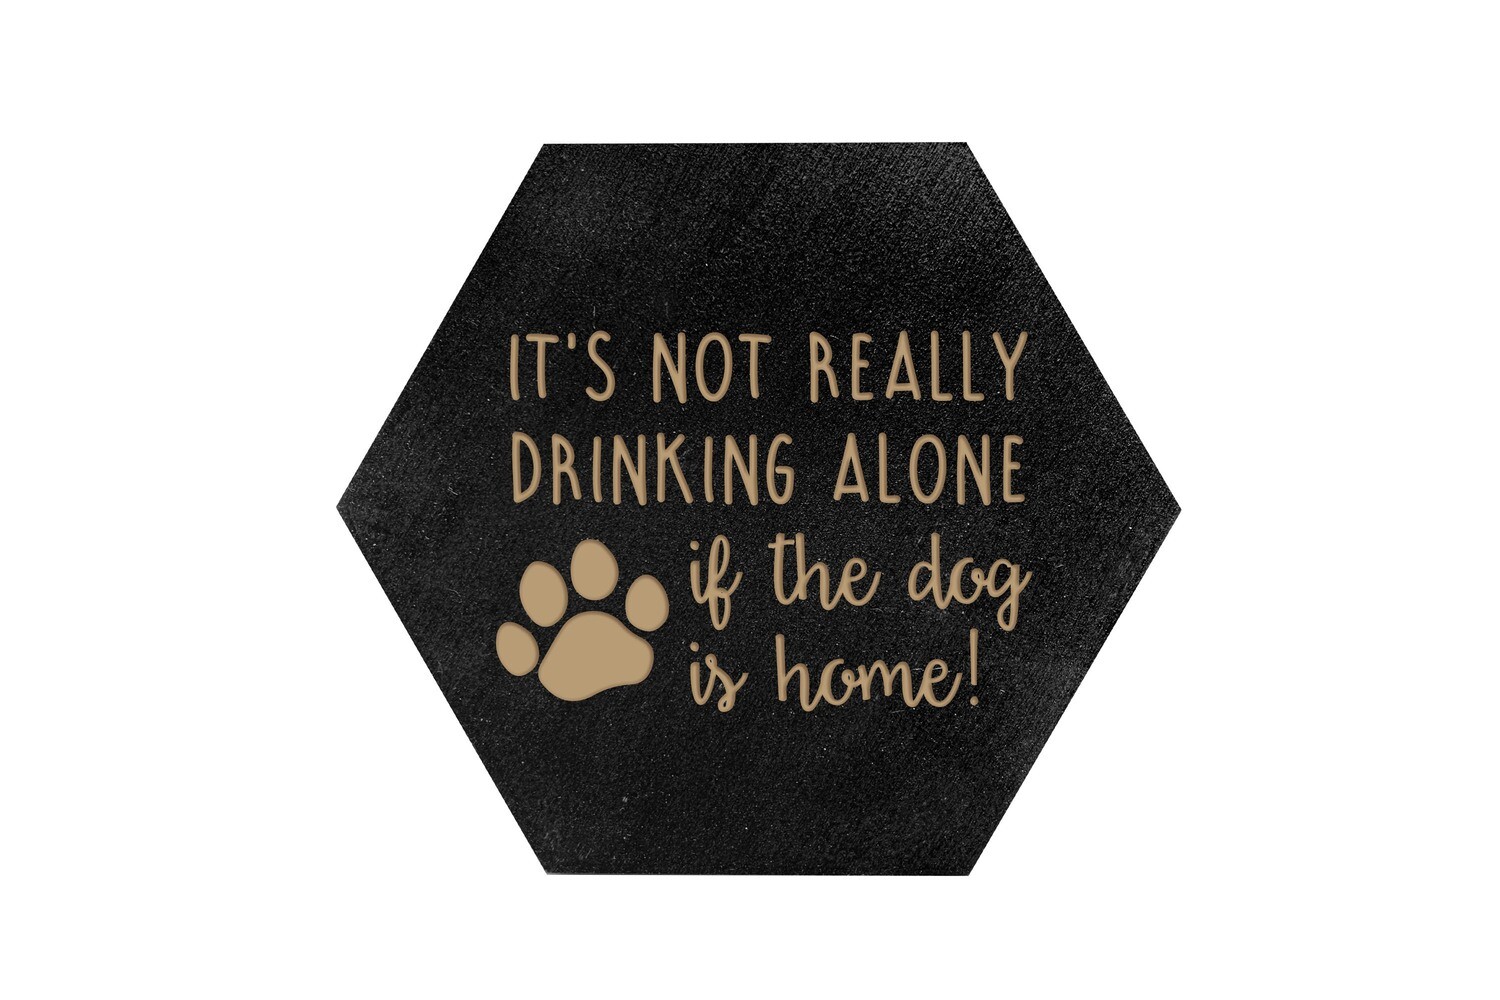 It's not really drinking alone if the dog is home on HEX Hand-Painted Wood Coaster Set